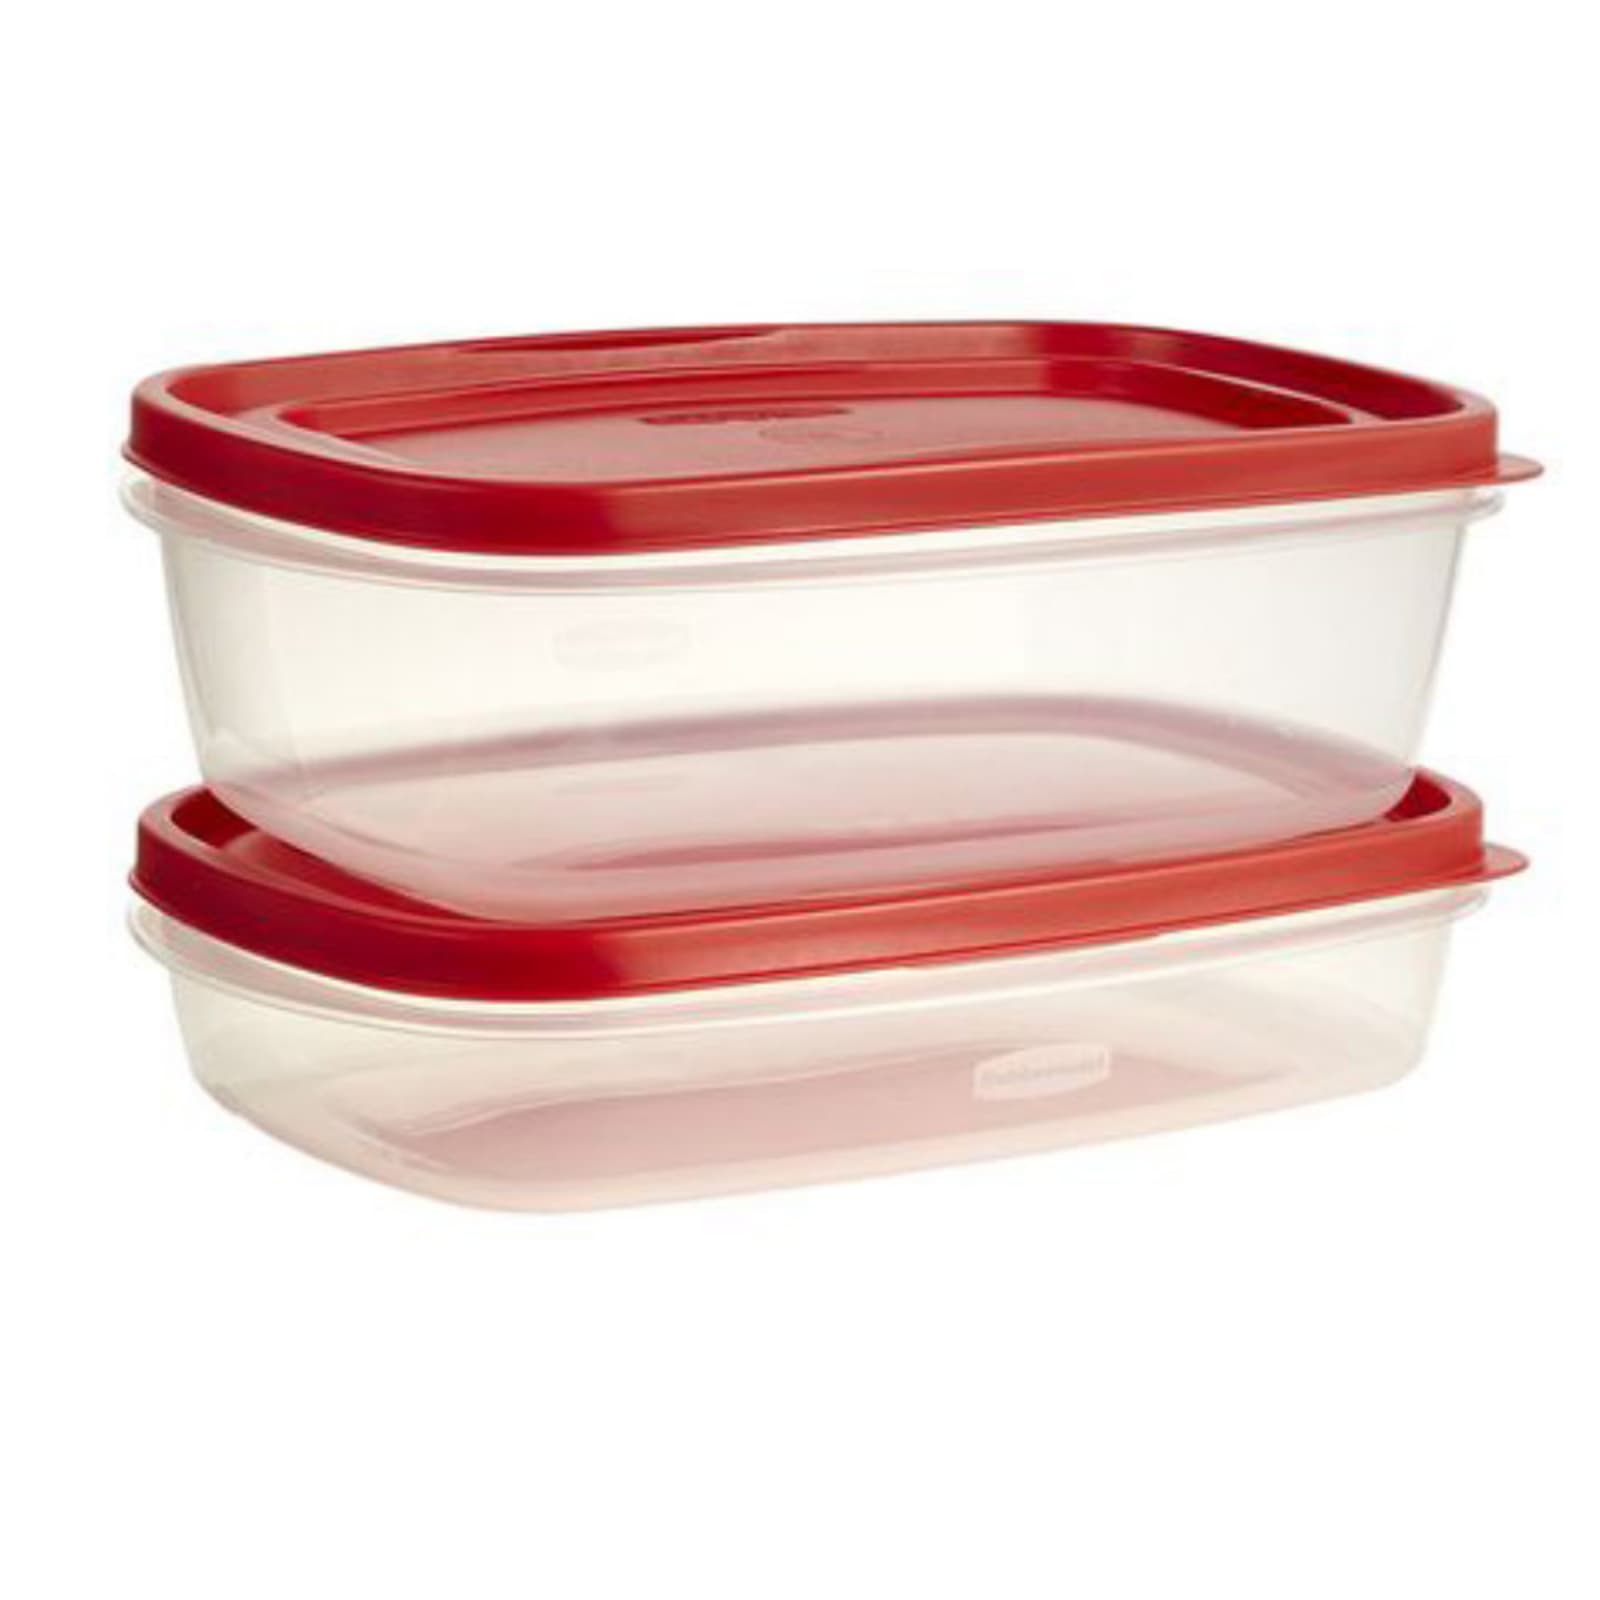 5.5 Cup and 8.5 Cup Easy Find Lids Containers by Rubbermaid at